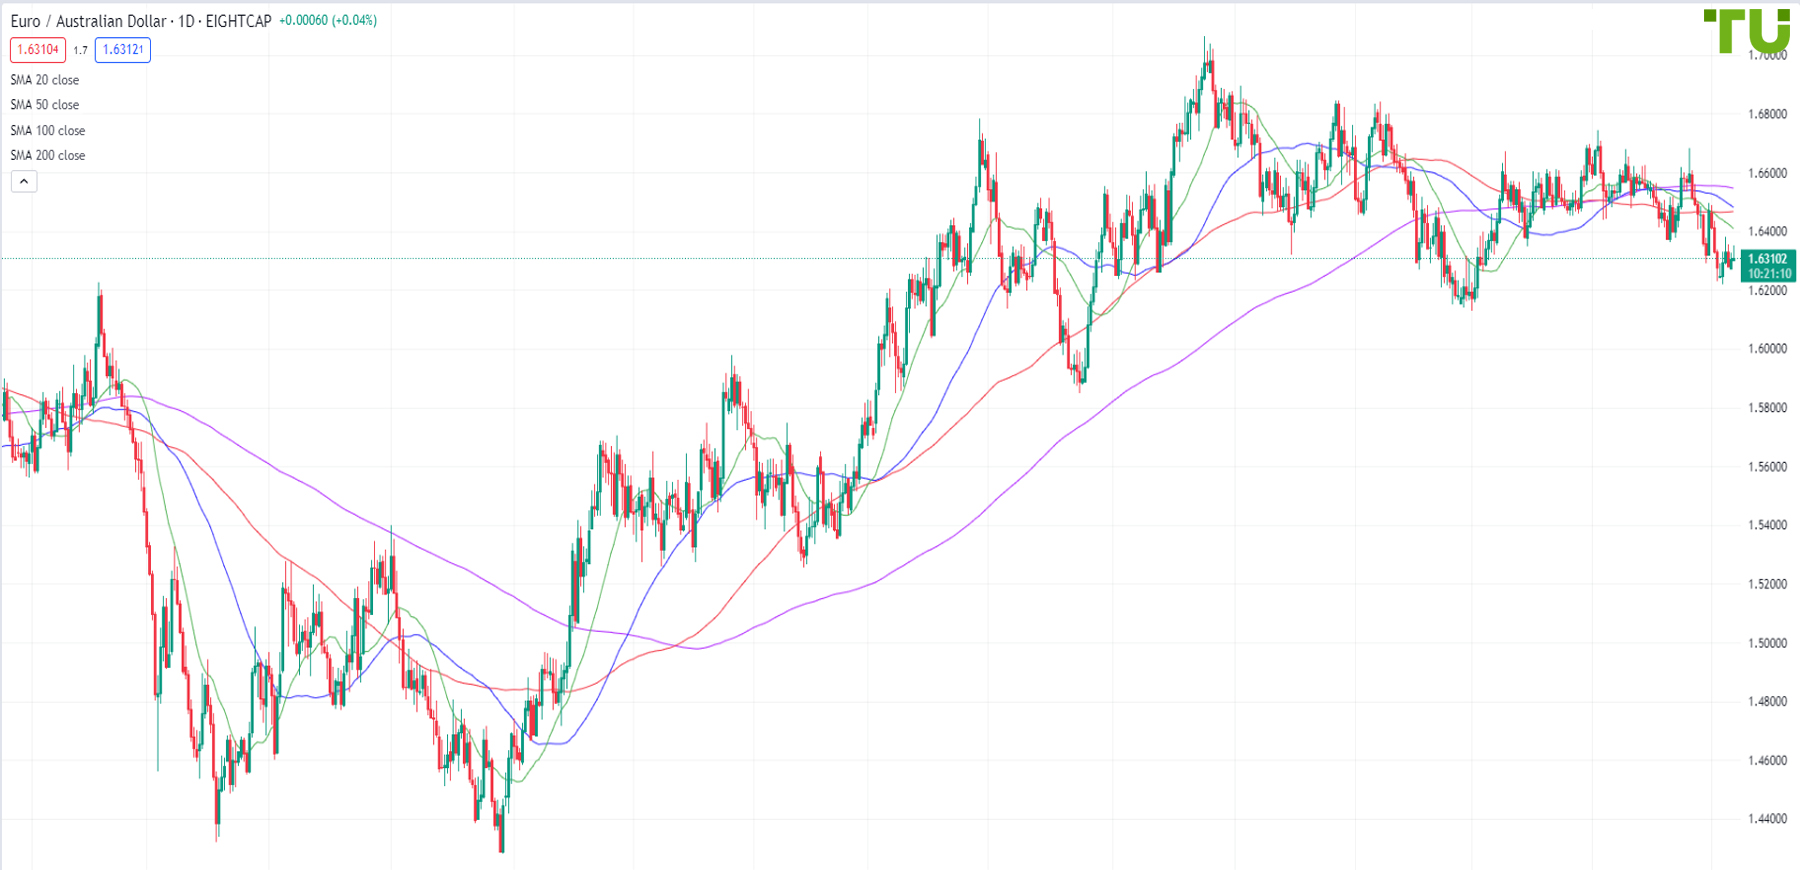 EUR/AUD is under pressure after the rise